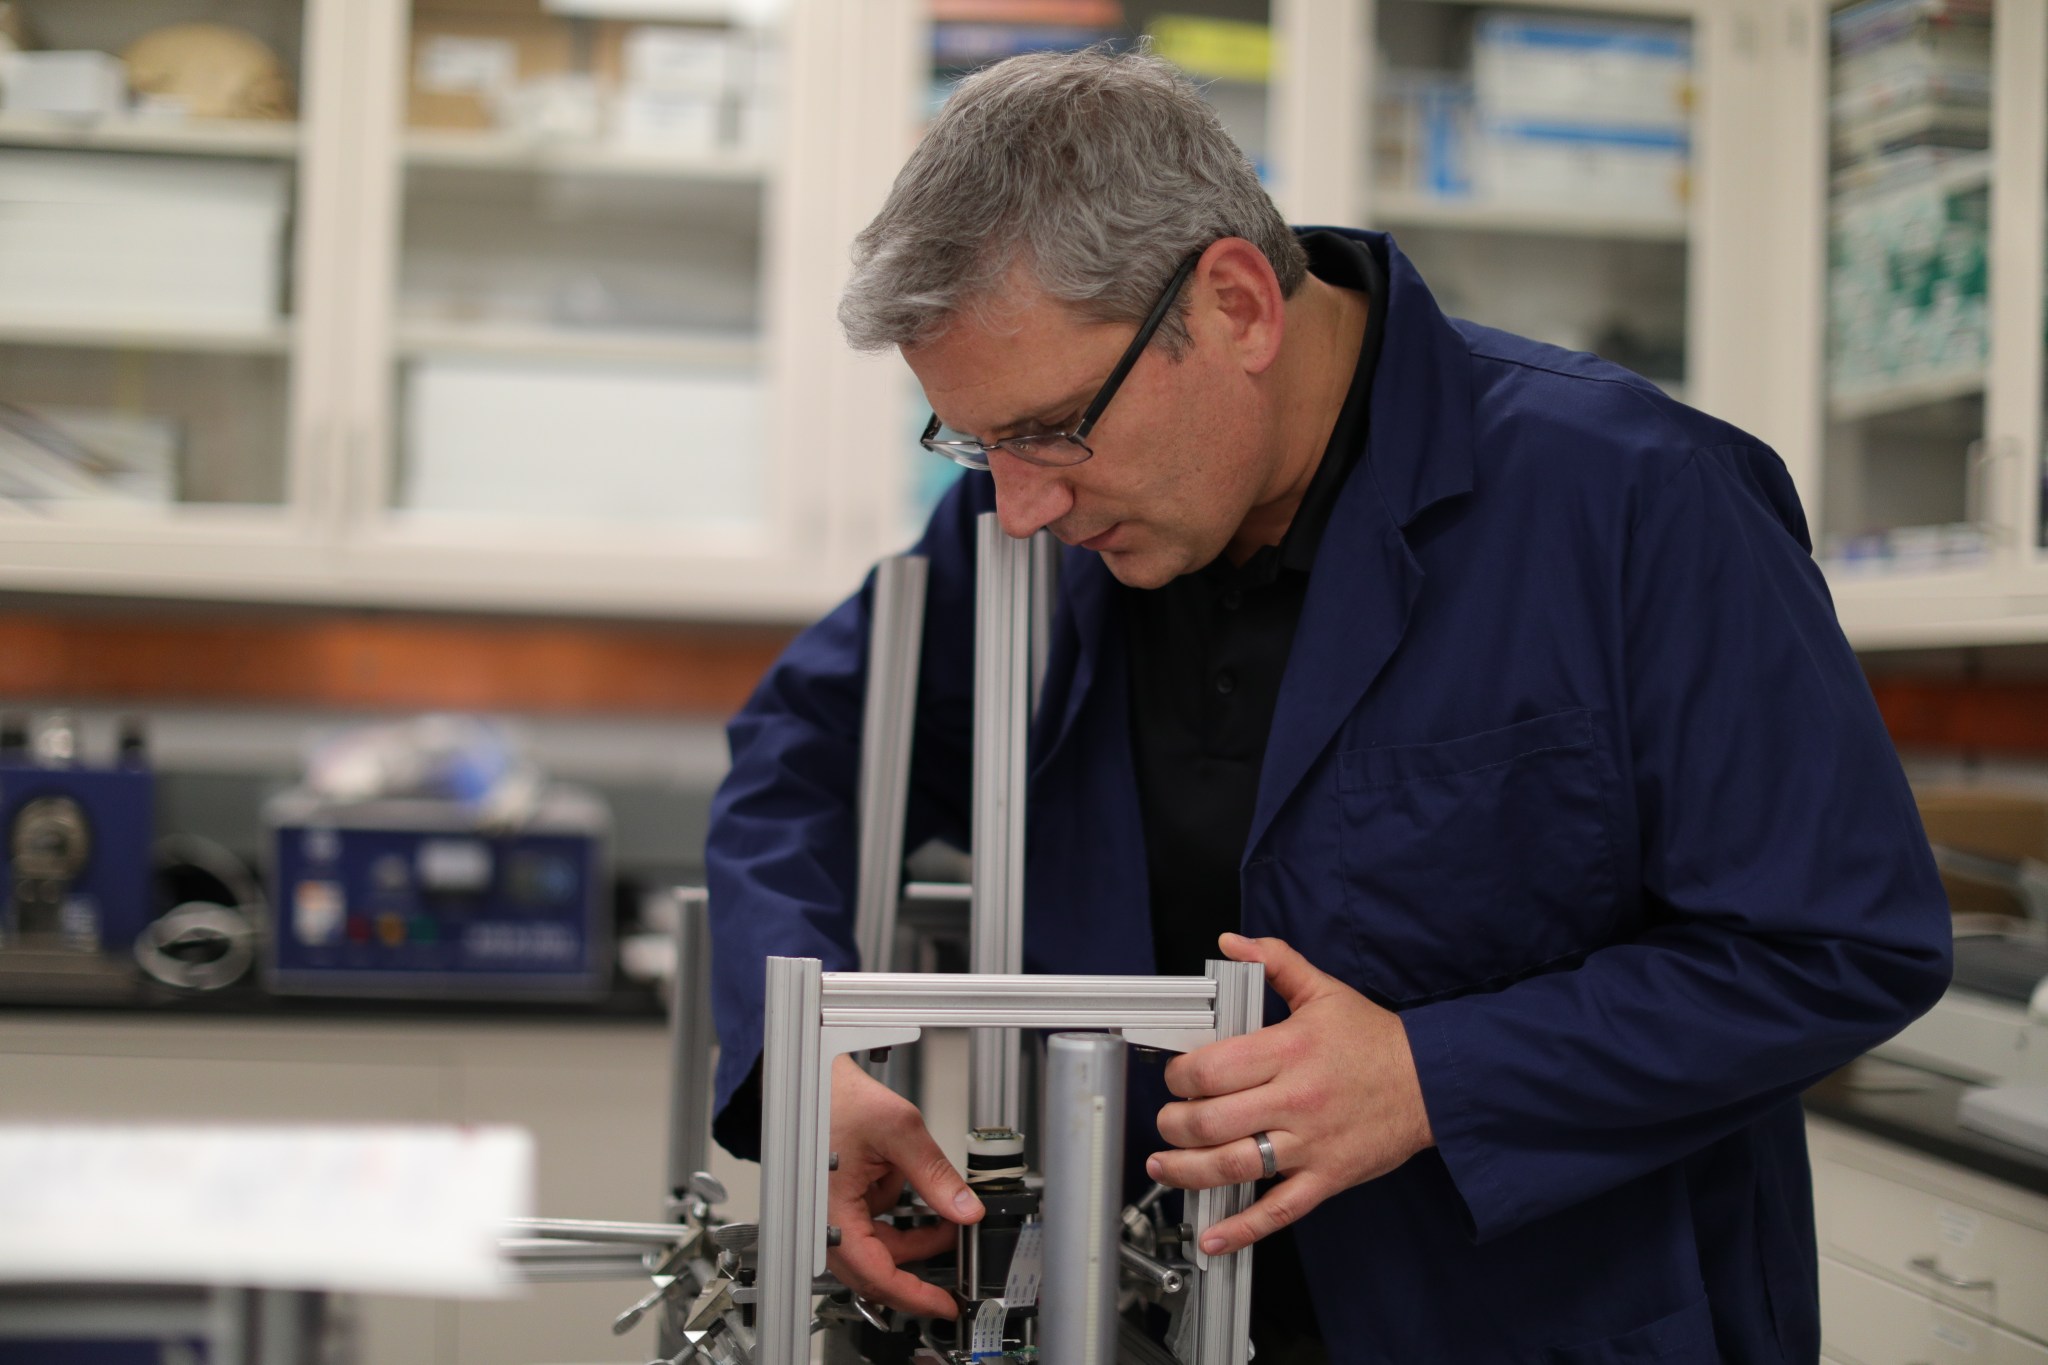 Mike Dupuis, project manager for Electrostatics and Surface Physics Laboratory, is shown working in the lab.